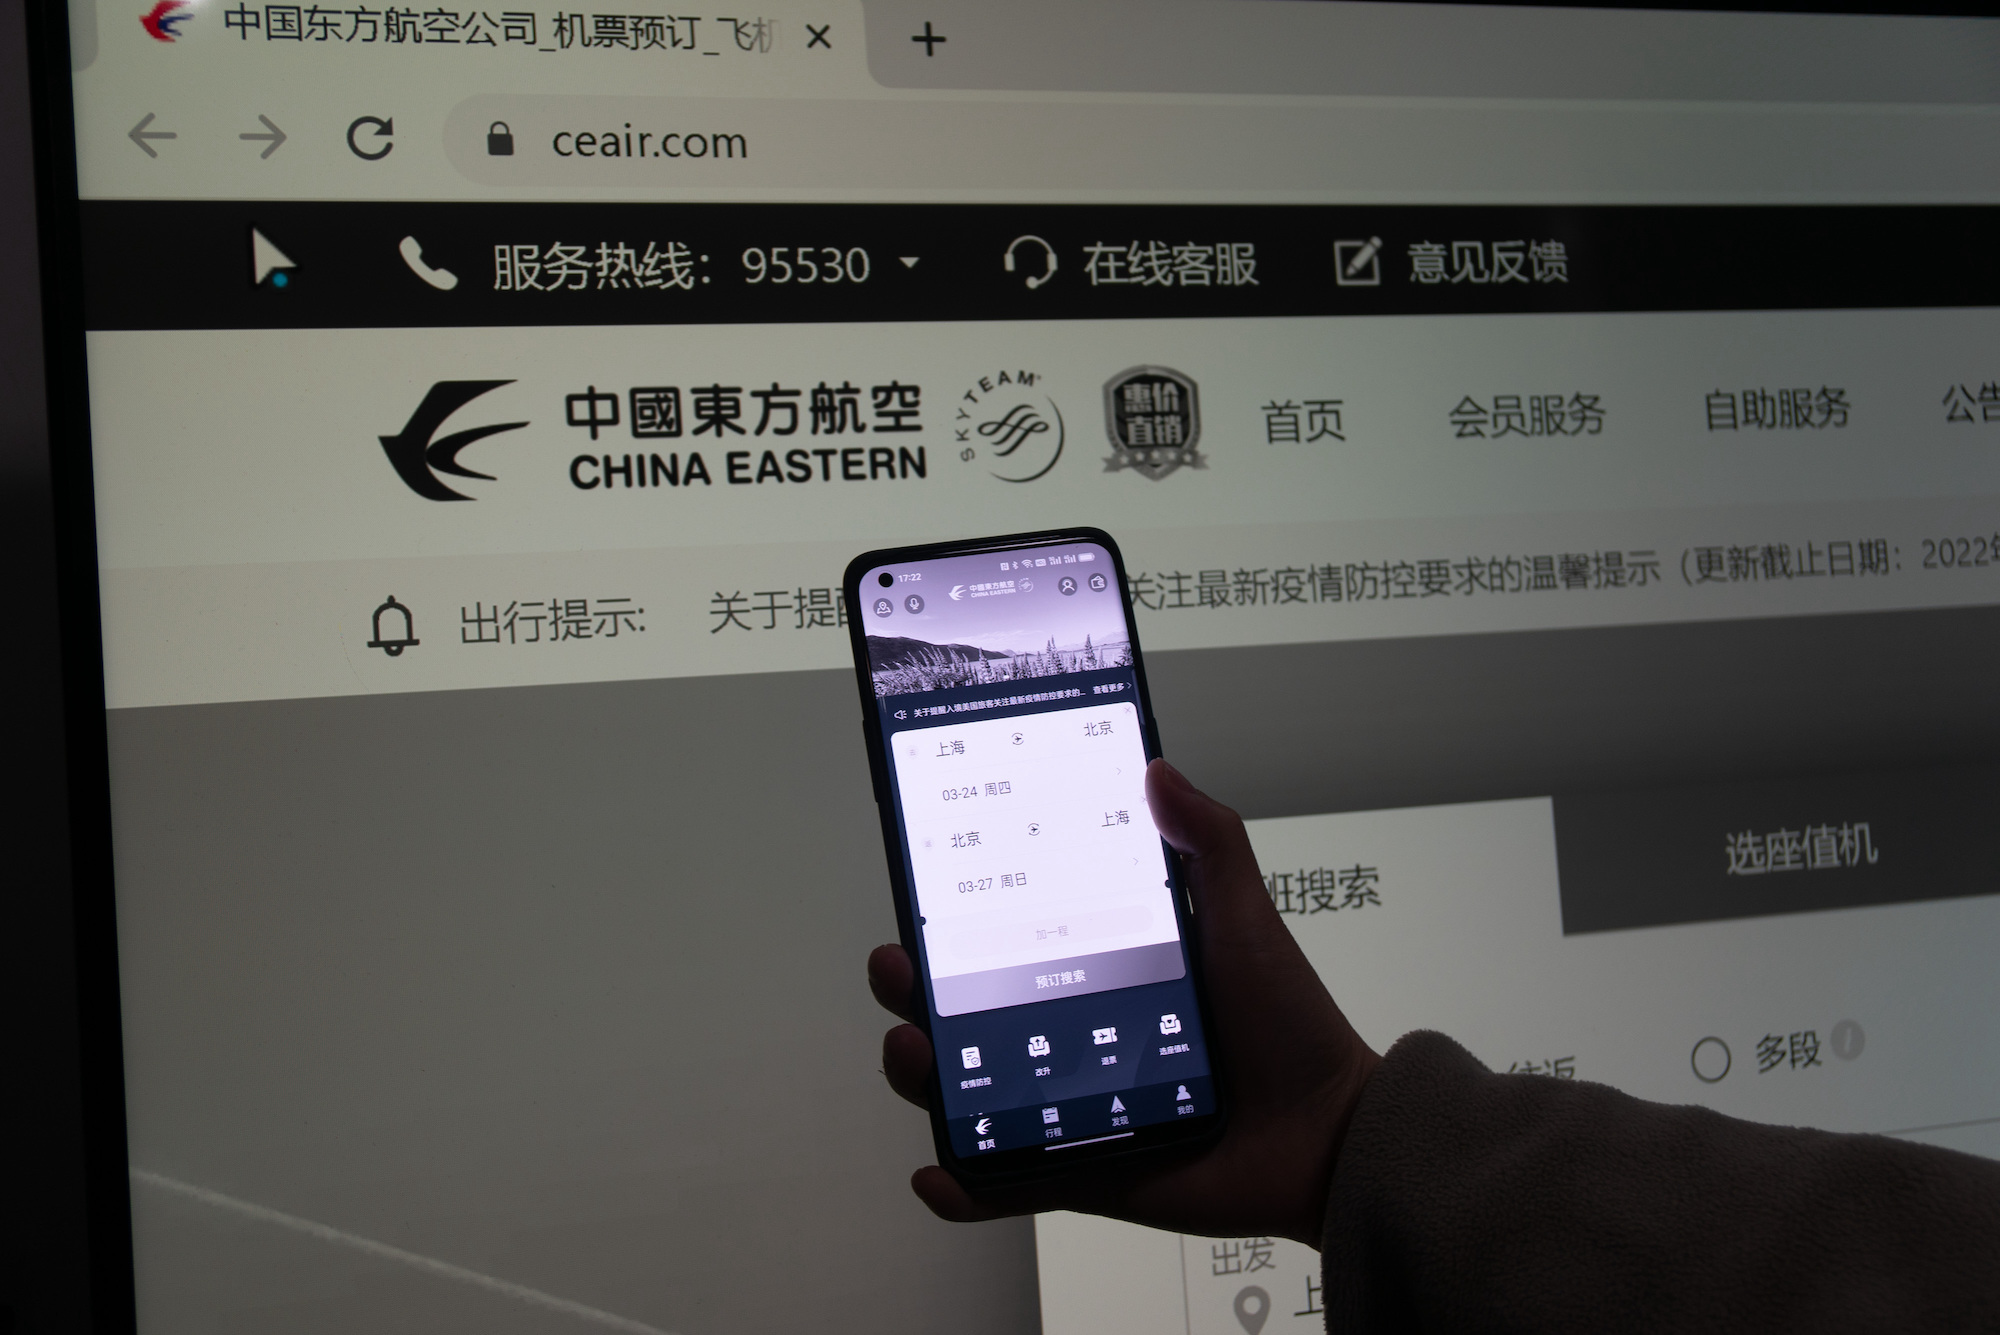 On March 21, both the website and the mobile app for China Eastern Airlines were displaying in black and white following the crash of one of the airline's passenger jets.